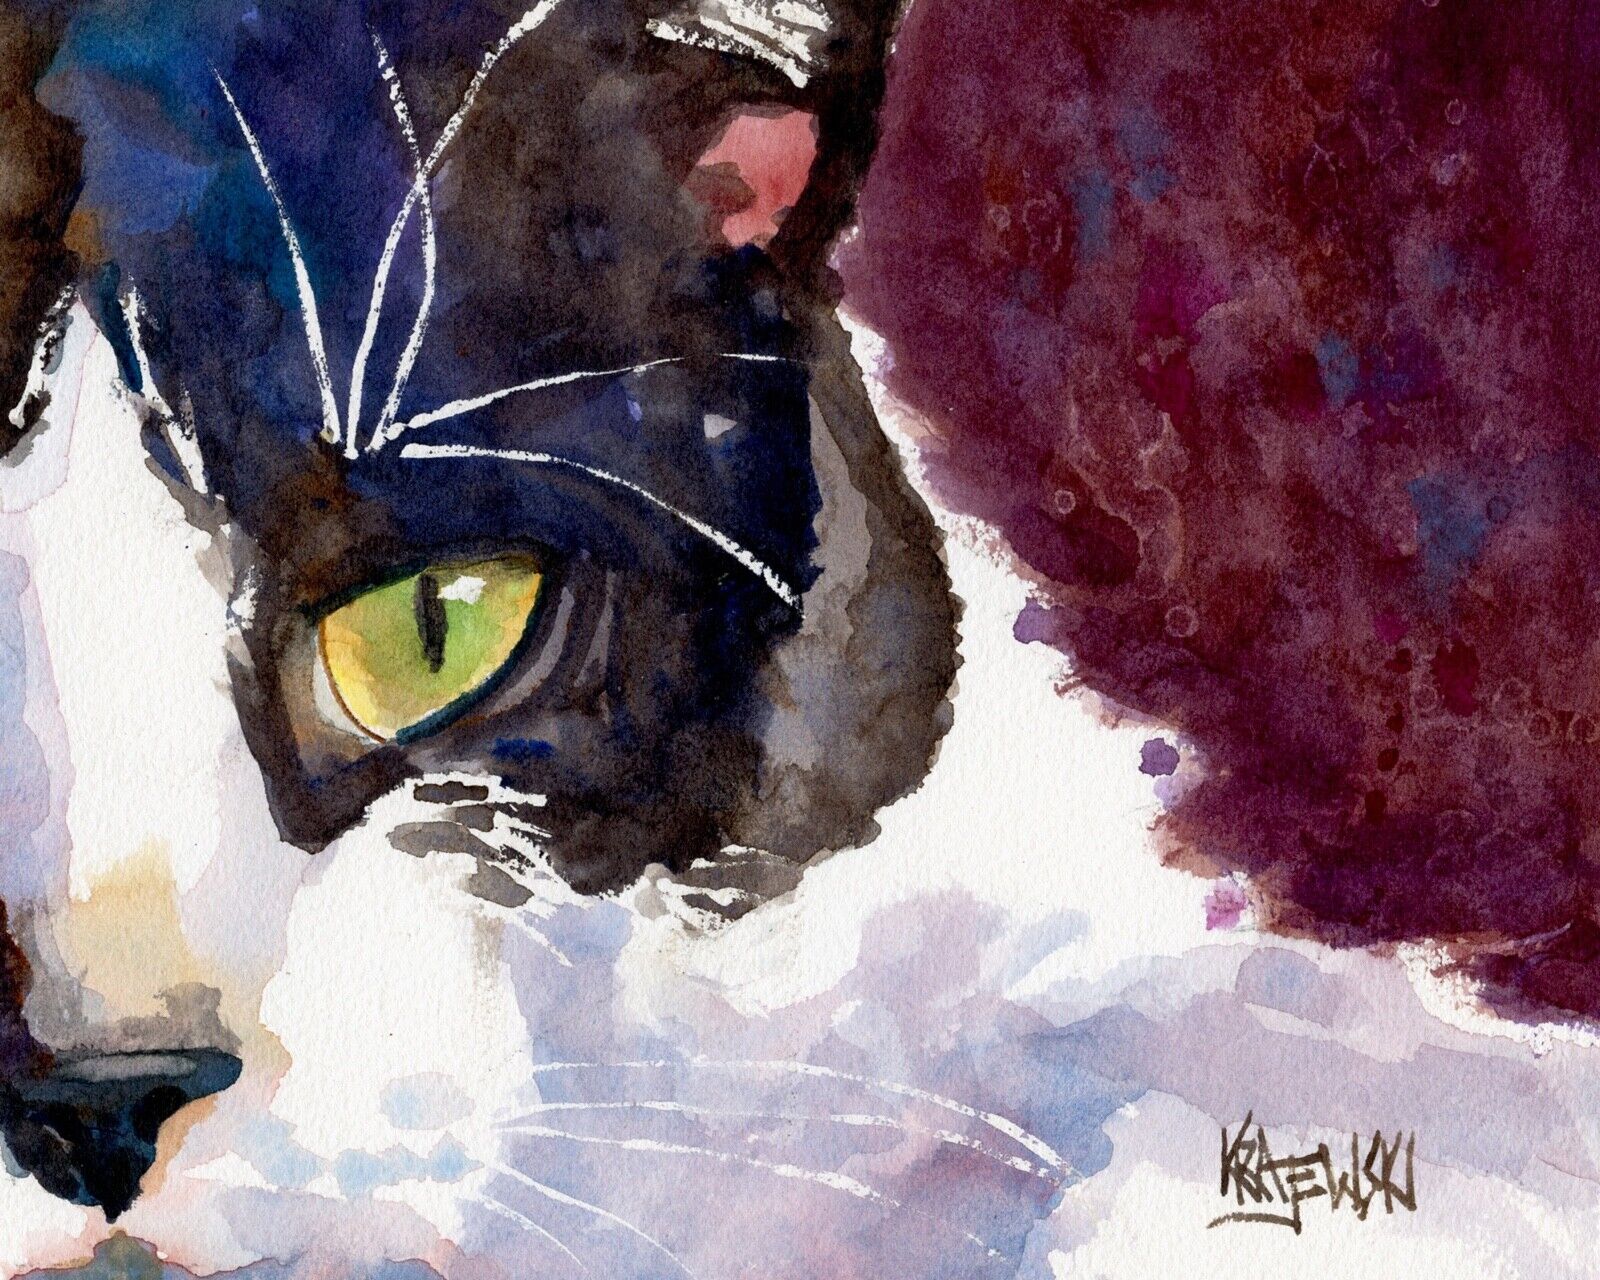 Tuxedo Cat Art Print from Painting | Gifts, Portrait, Poster, Wall Art 8x10